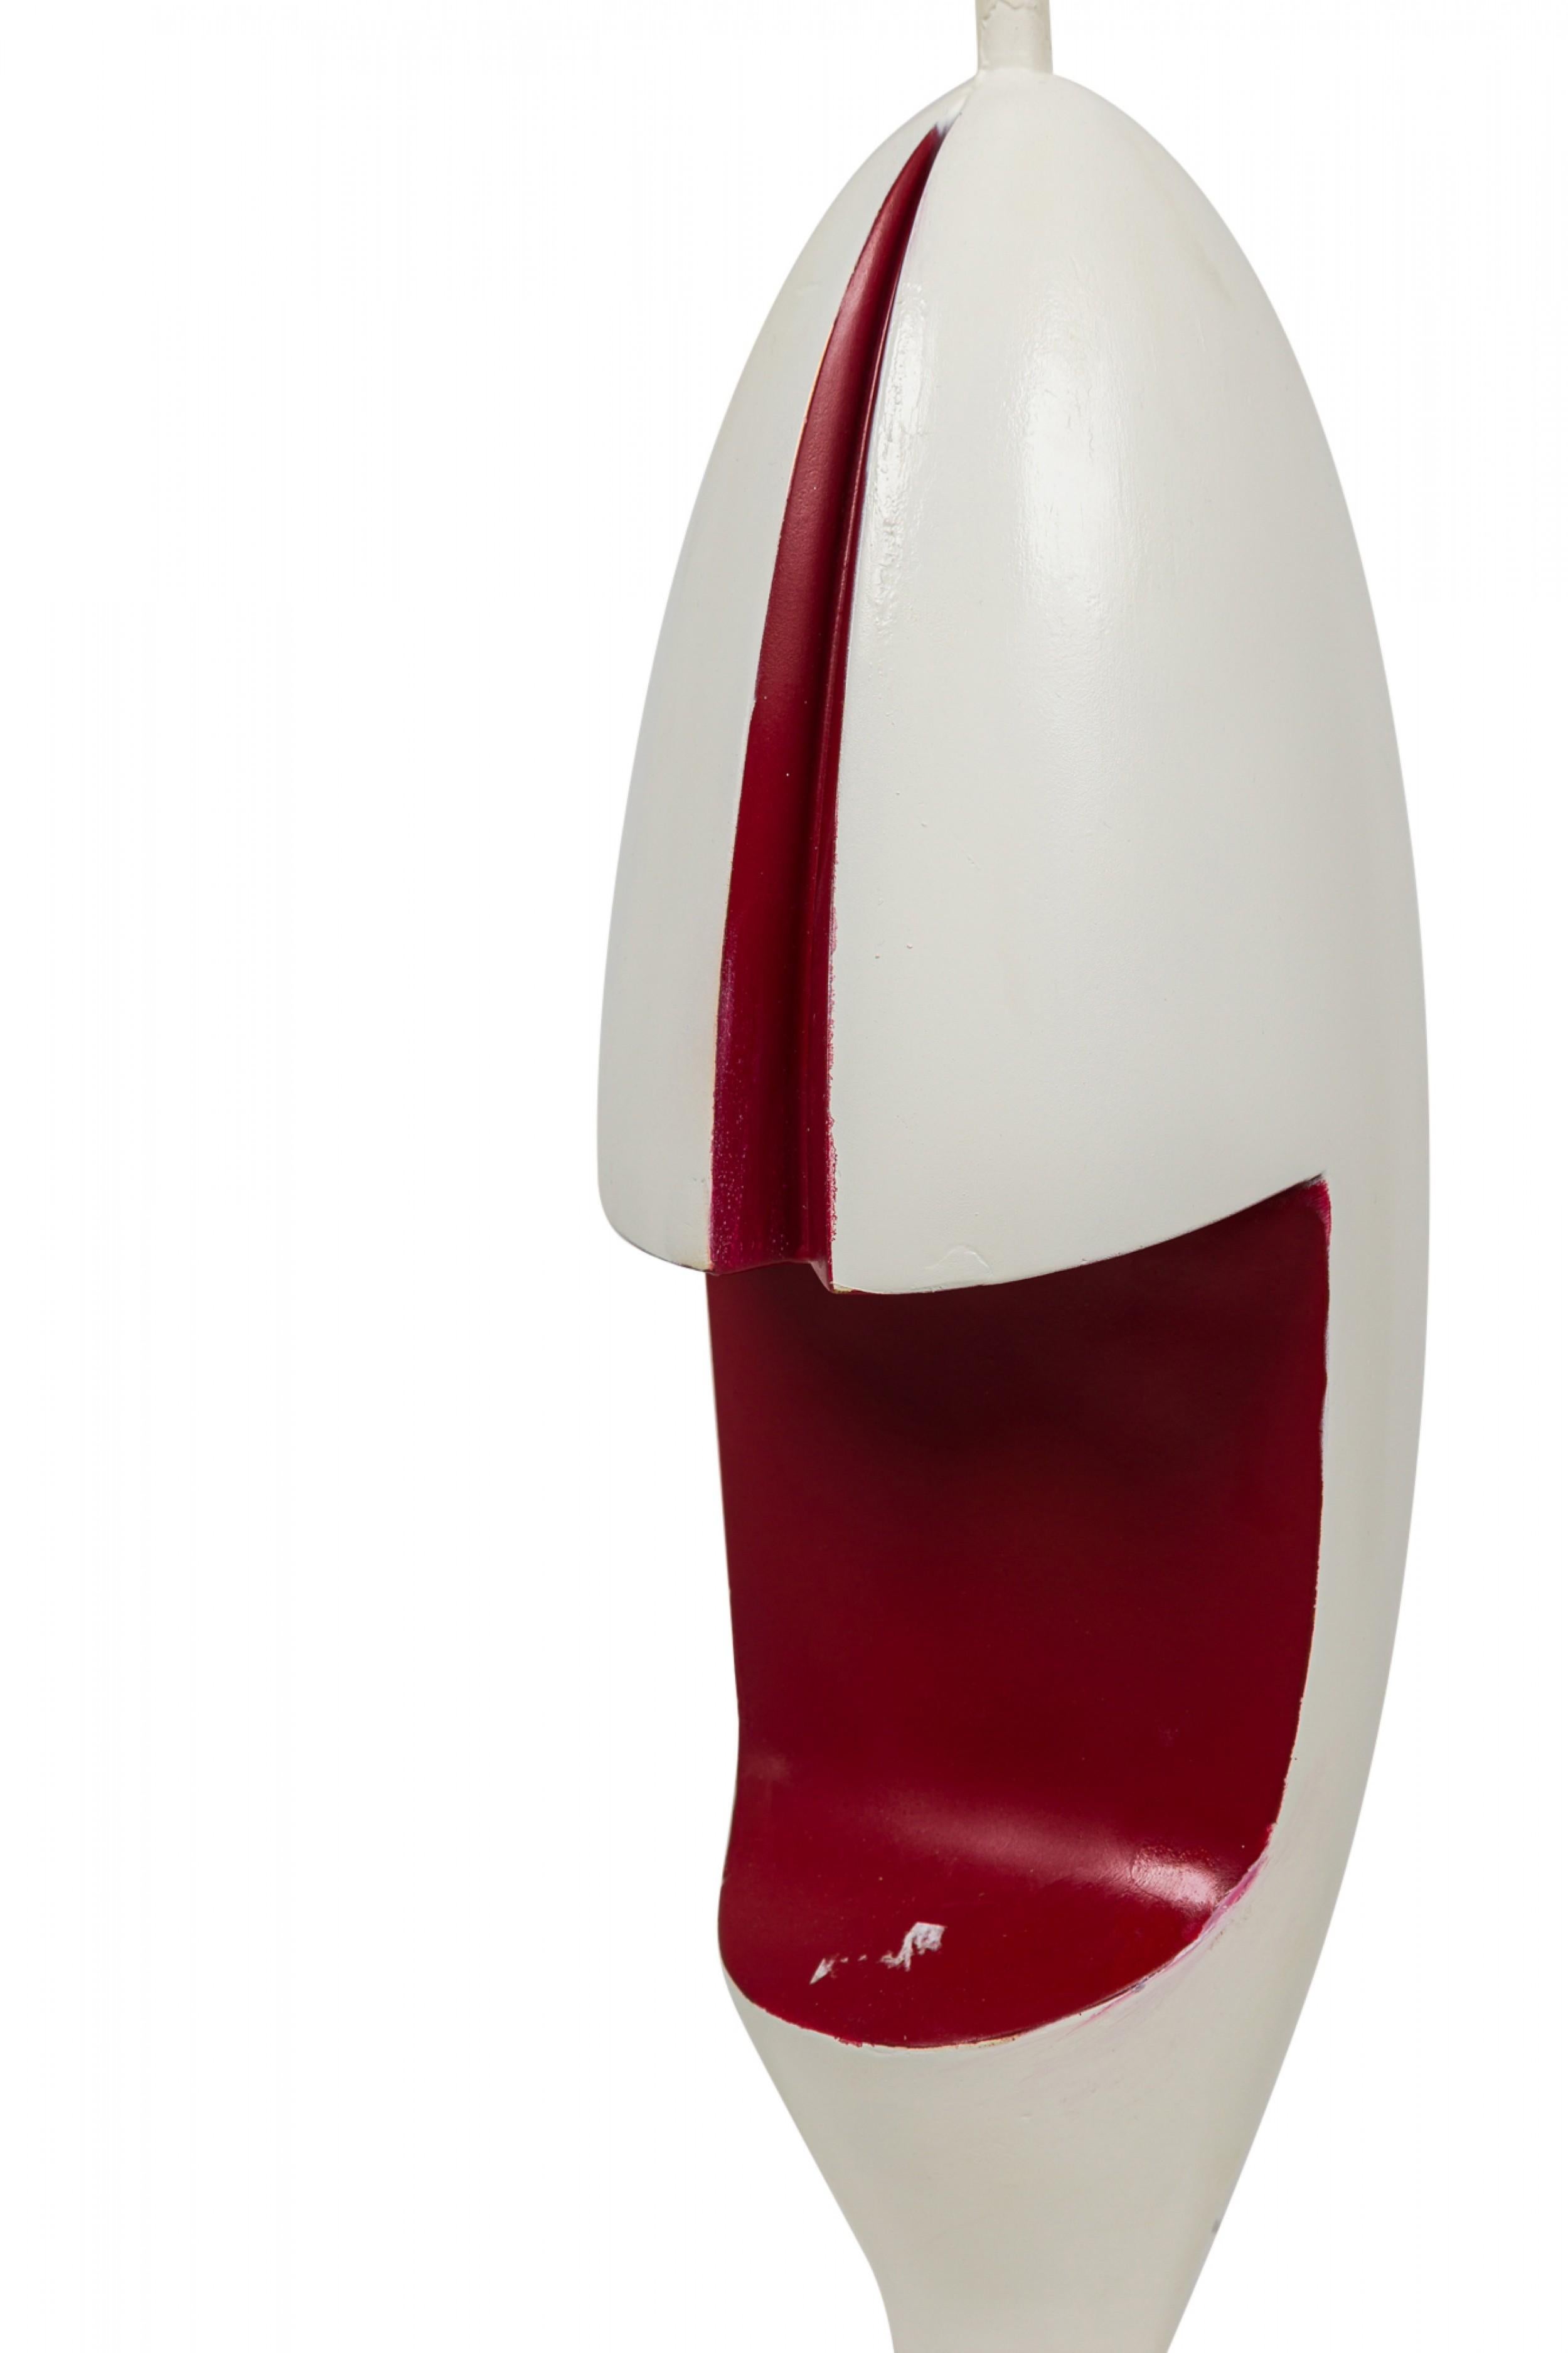 Mid-Century American Harlequin Bishop table lamp composed of red and white painted plaster, sculpted in the form of a bishop chess piece featuring an elongated oval body which splits in half vertically at the upper section with a protruding stem and